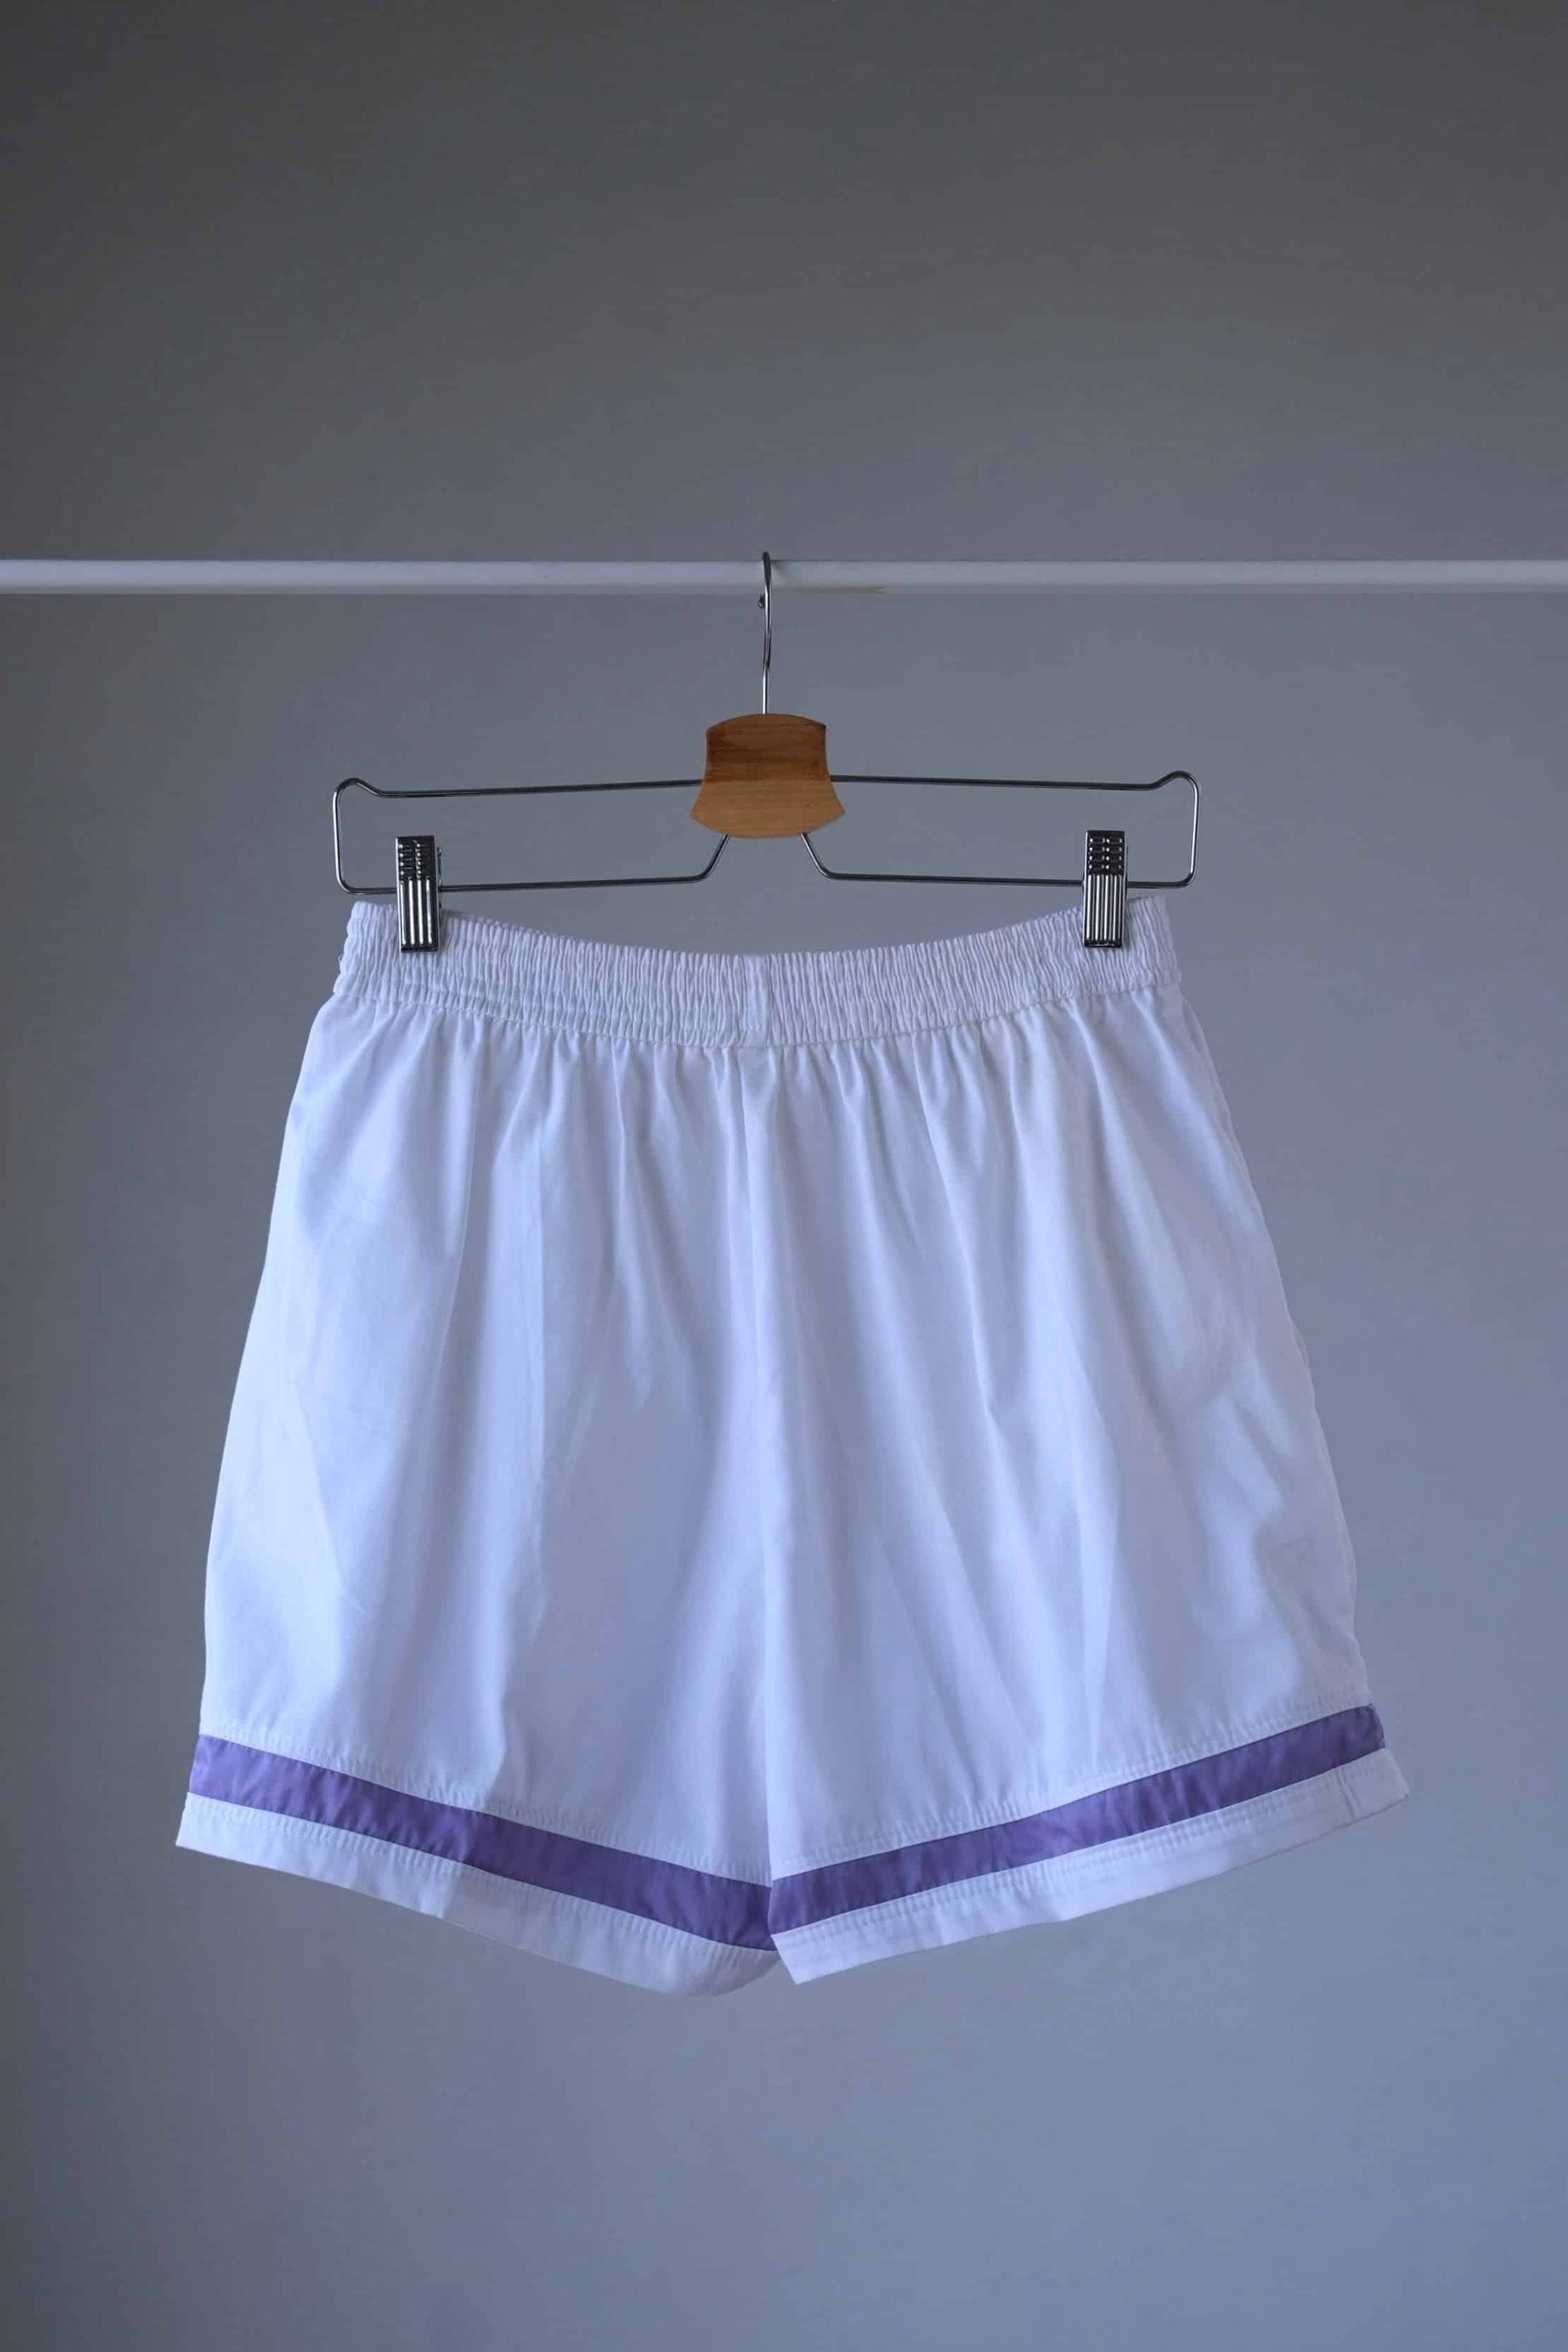 White and purple LÖFFLER Vintage Tennis Shorts shot from the back